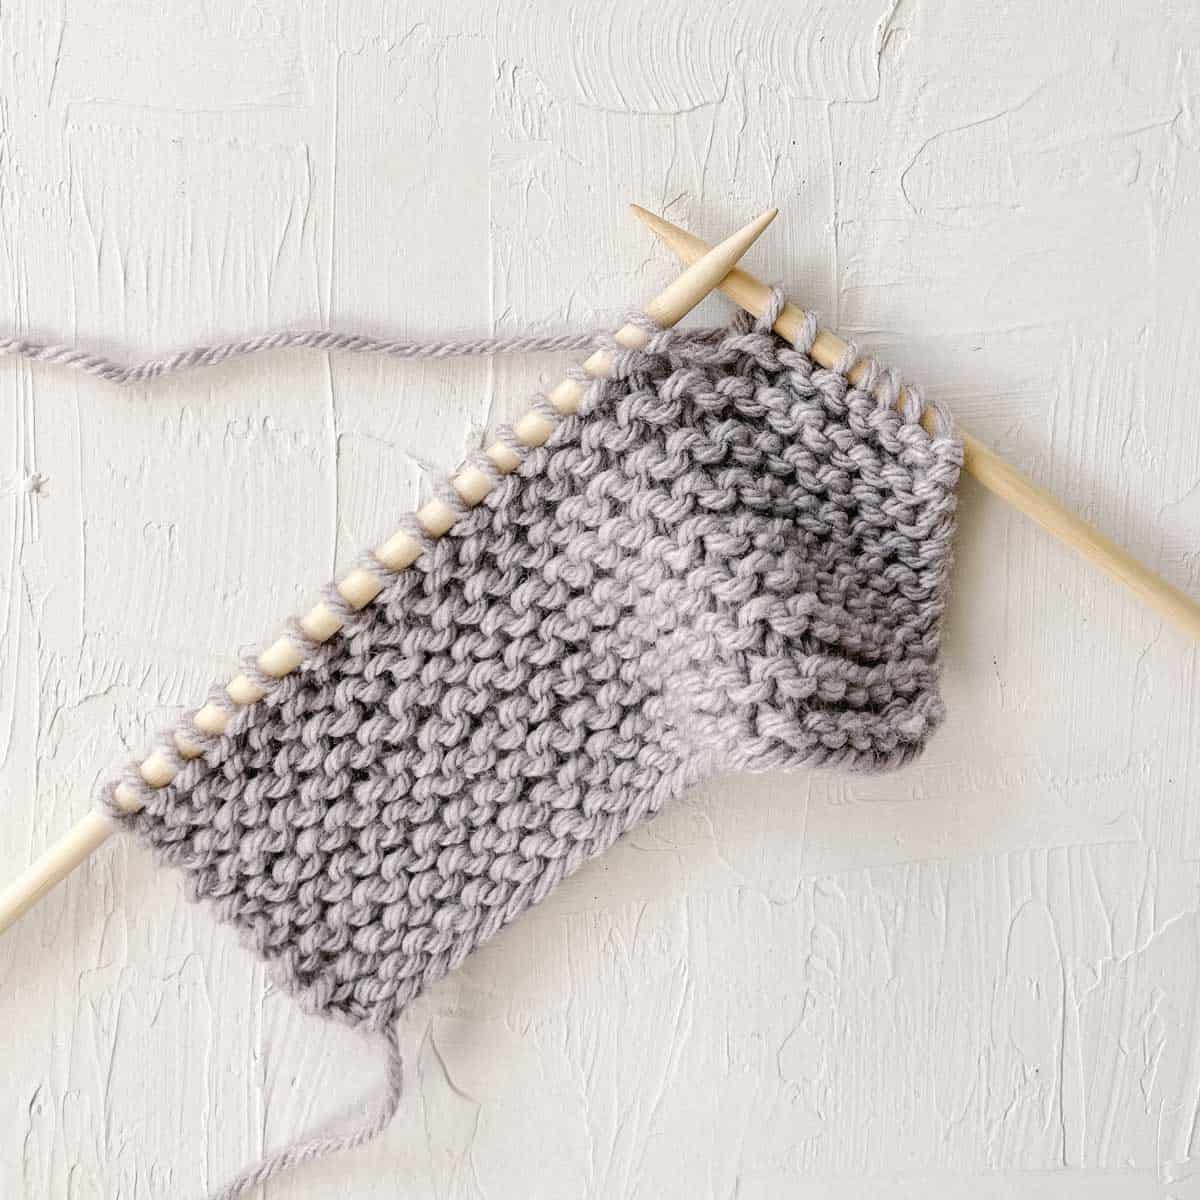 Knit stitches spread between two knitting needles.